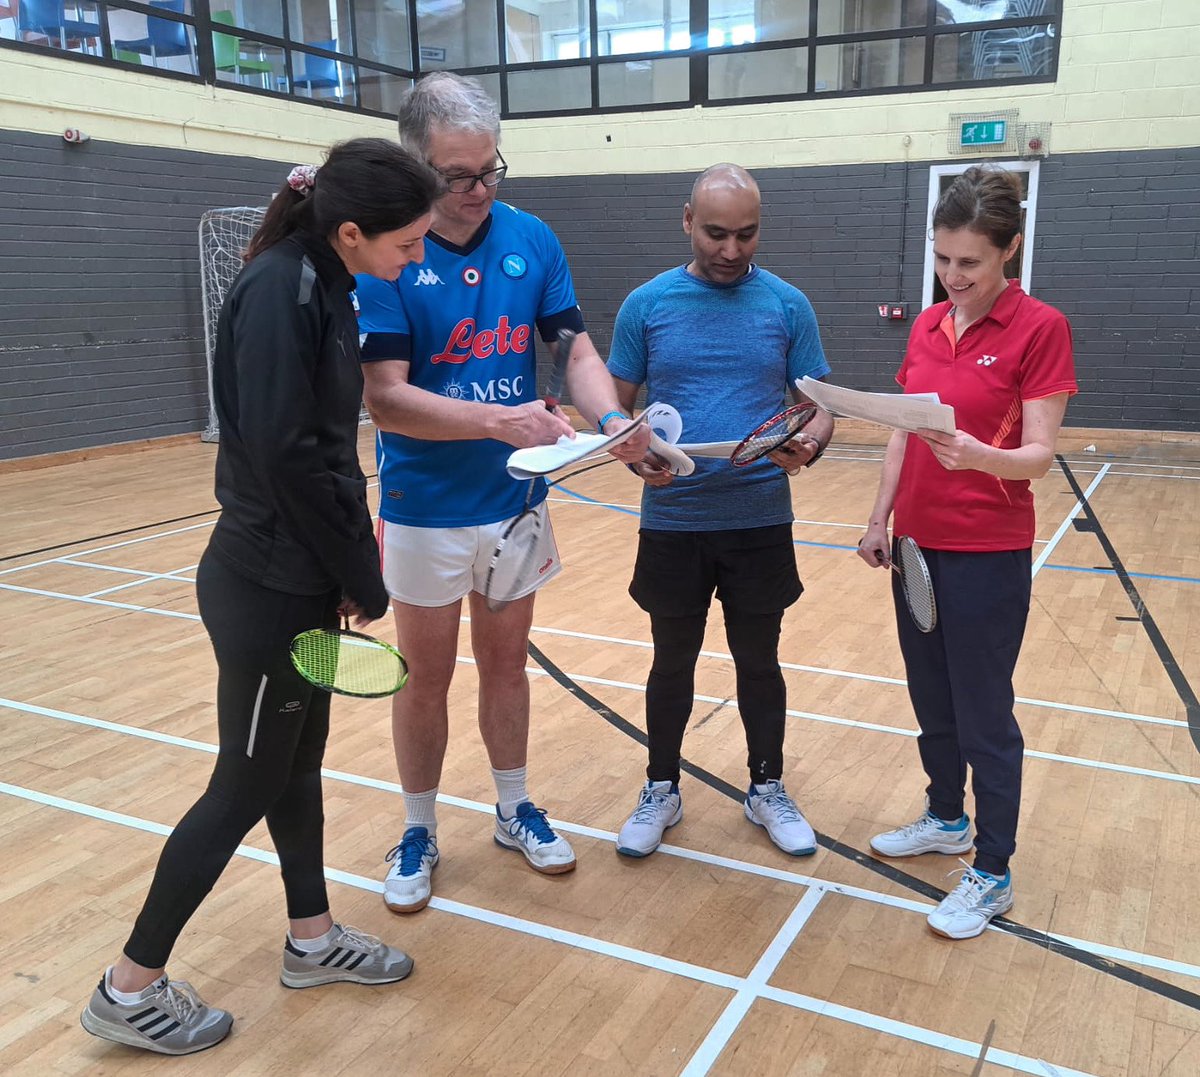 Another great Shuttle Time Coaching course took place on the weekend gone in Enniscorthy, Wexford Coaches learned how to deliver the shuttle time coaching material and implement it in their clubs Well done to Coach Developer Michelle Hayes for delivering the course 🏸🇮🇪